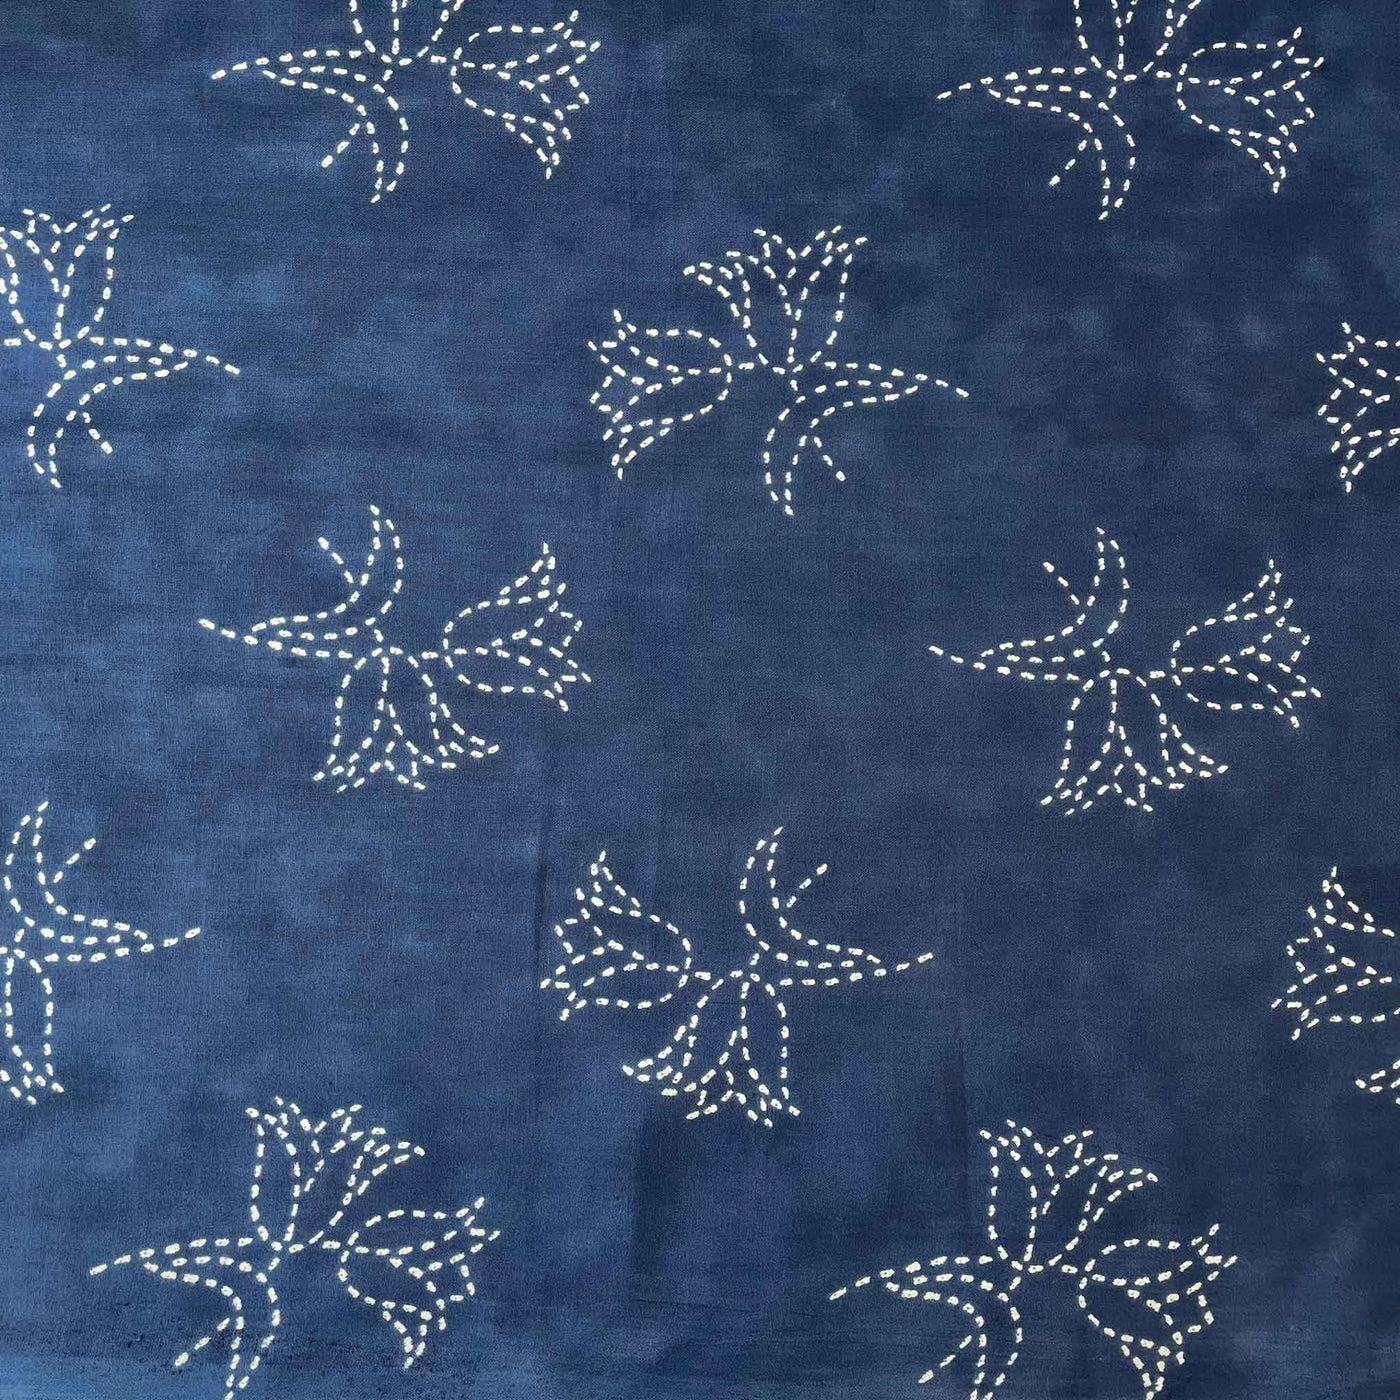 Hand Block Printed Cotton Fabric Cut Piece (CUT PIECE) Cloudy Blue and White Roses Hand Block Printed Pure Cotton Fabric (Width 43 inches)